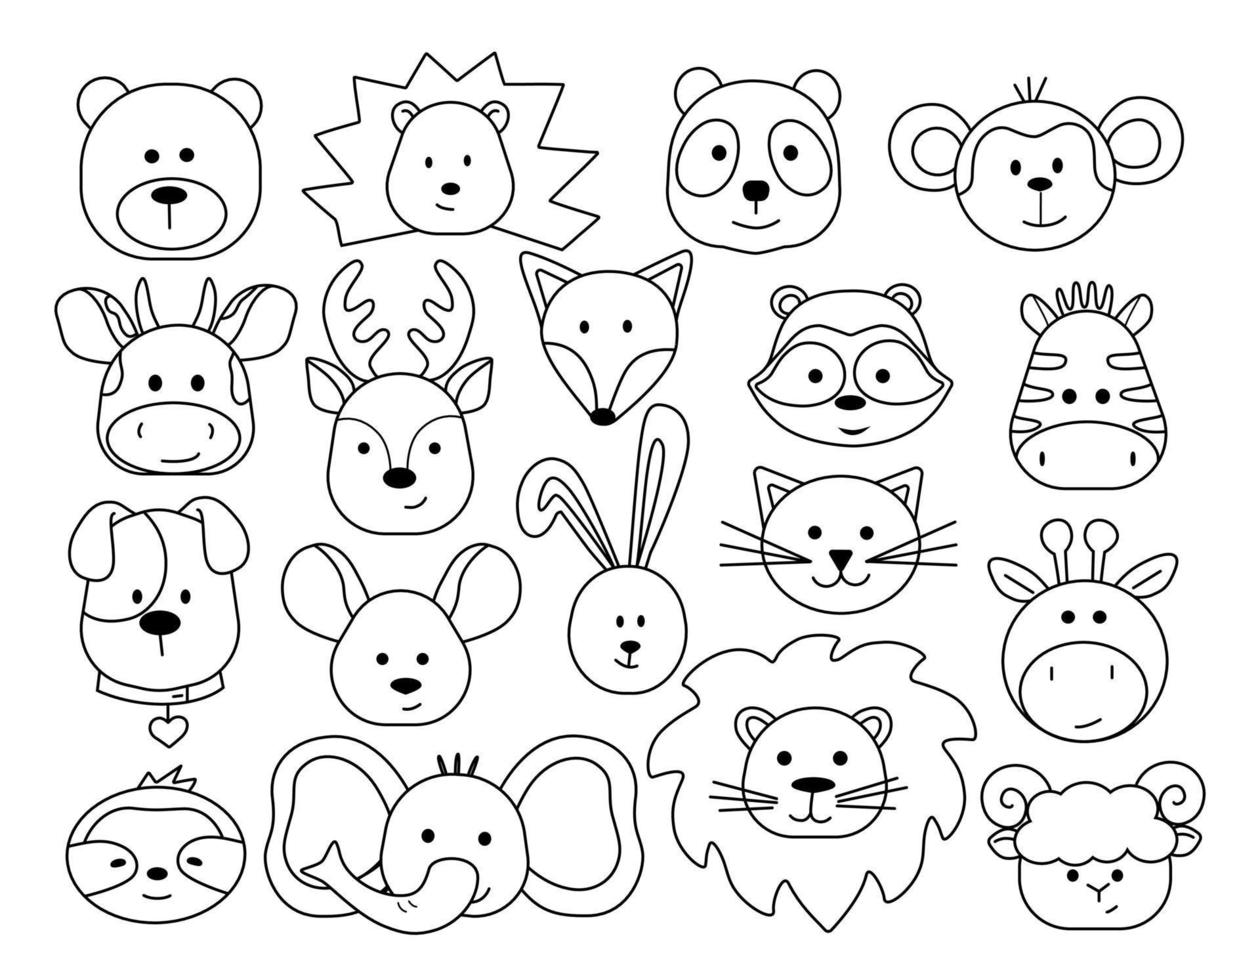 A set of animal heads in a childish cartoon style. Icons, simple outlines for decor, clip art, logo. Cute Fox, giraffe, elephant, lion, bull. Silhouette, sketch vector illustration.